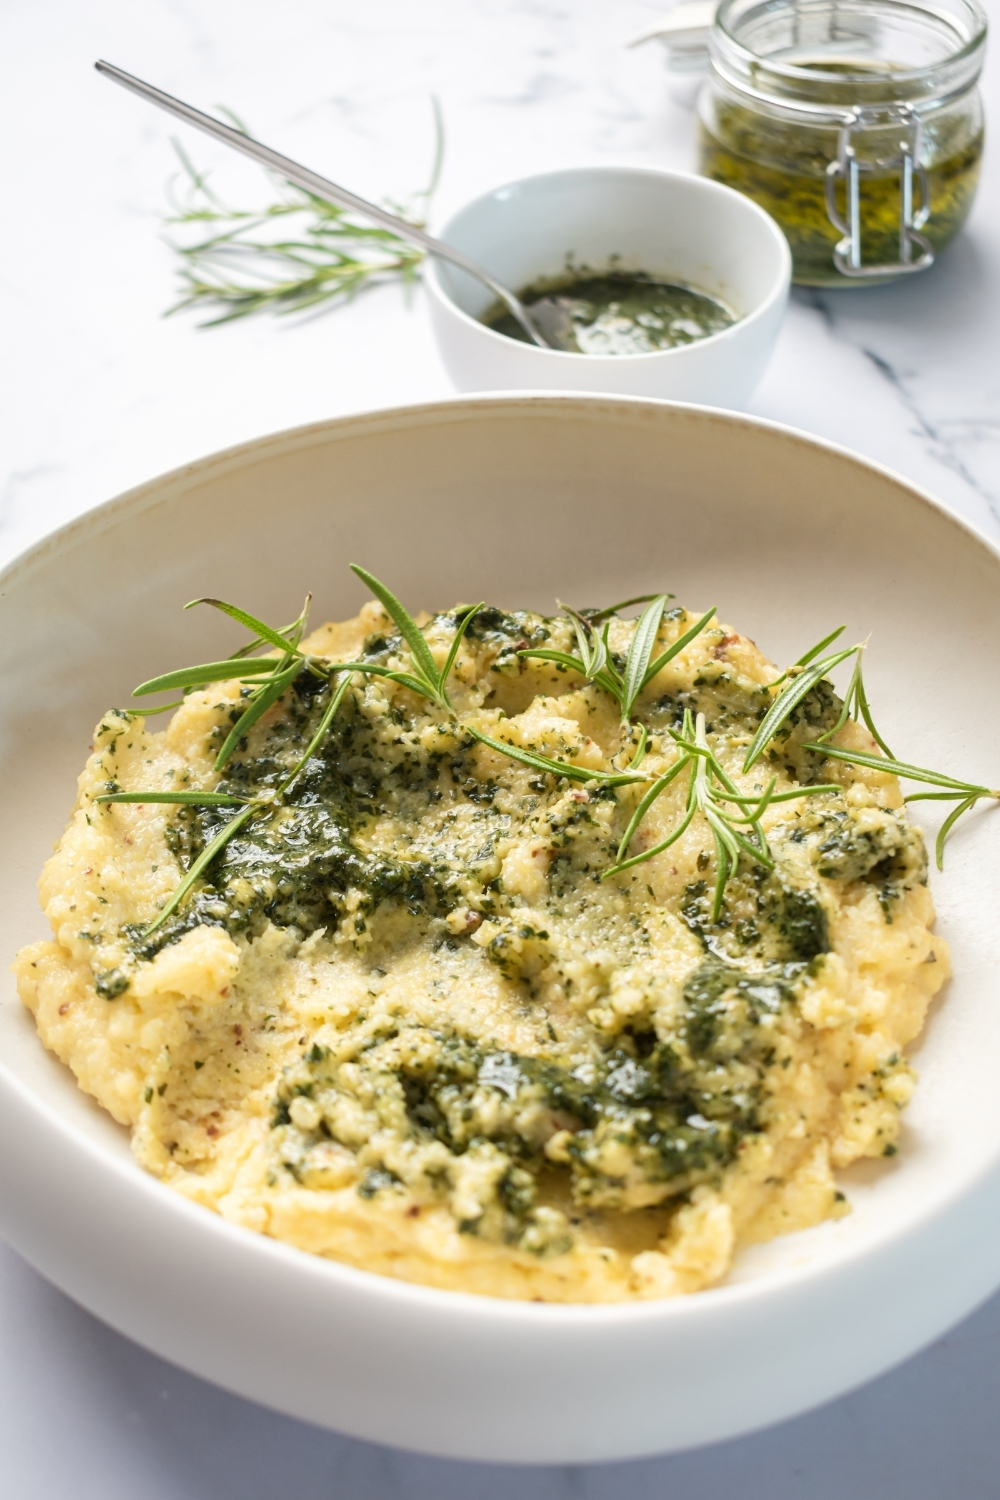 Cheesy polenta in a White bowl on the white counter. Behind it is a small white bowl filled with pesto and a glass jar of pesto right behind that.